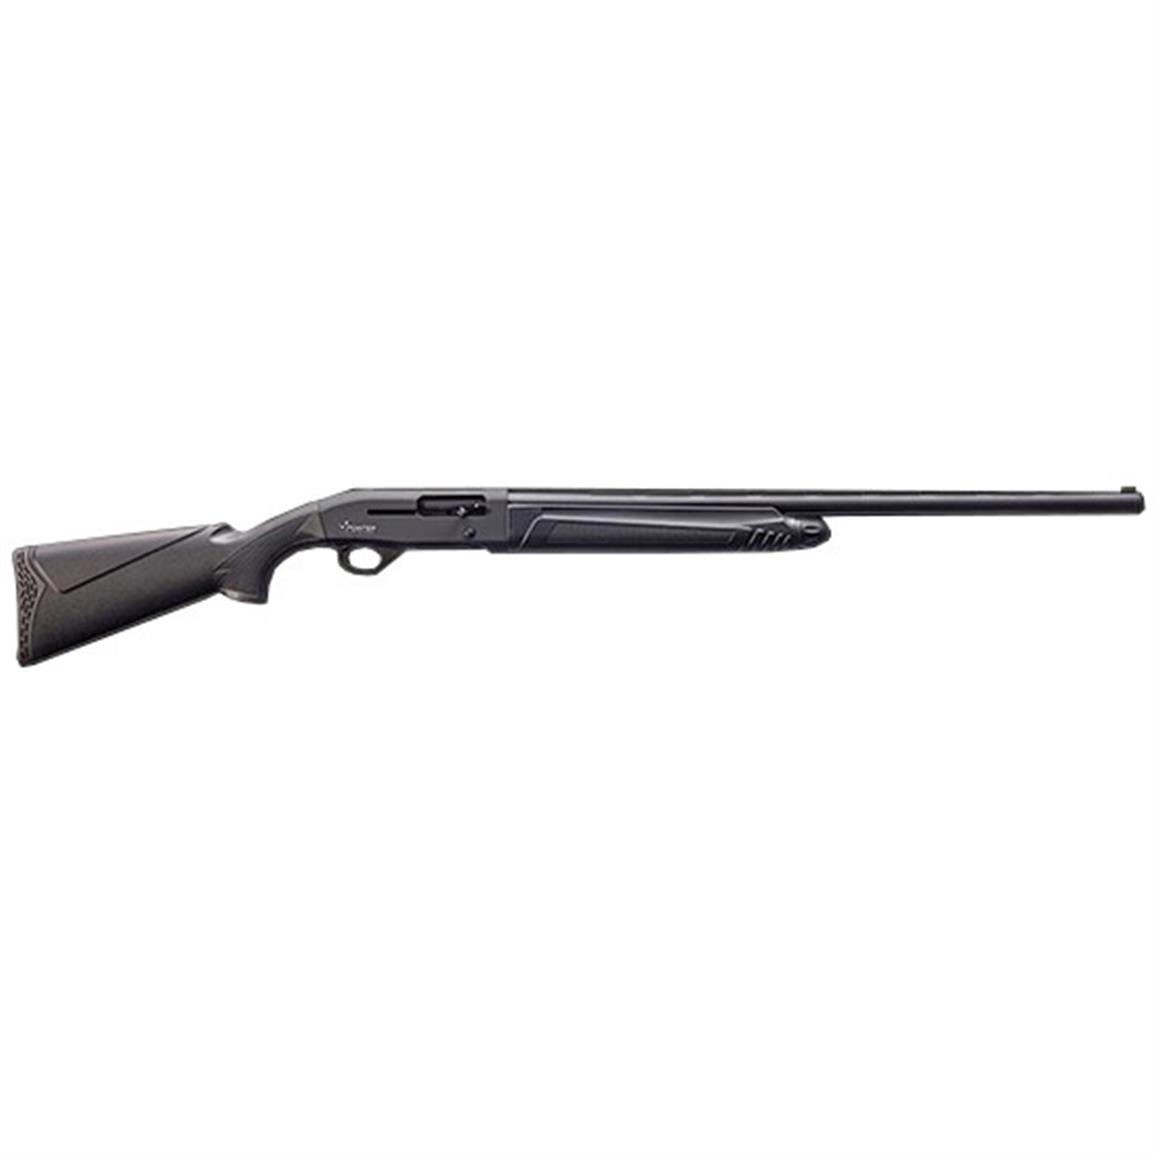 LSI Pointer Semi-Automatic Sporting, 12 Gauge, 28" & 24" Barrel, 4 Rounds